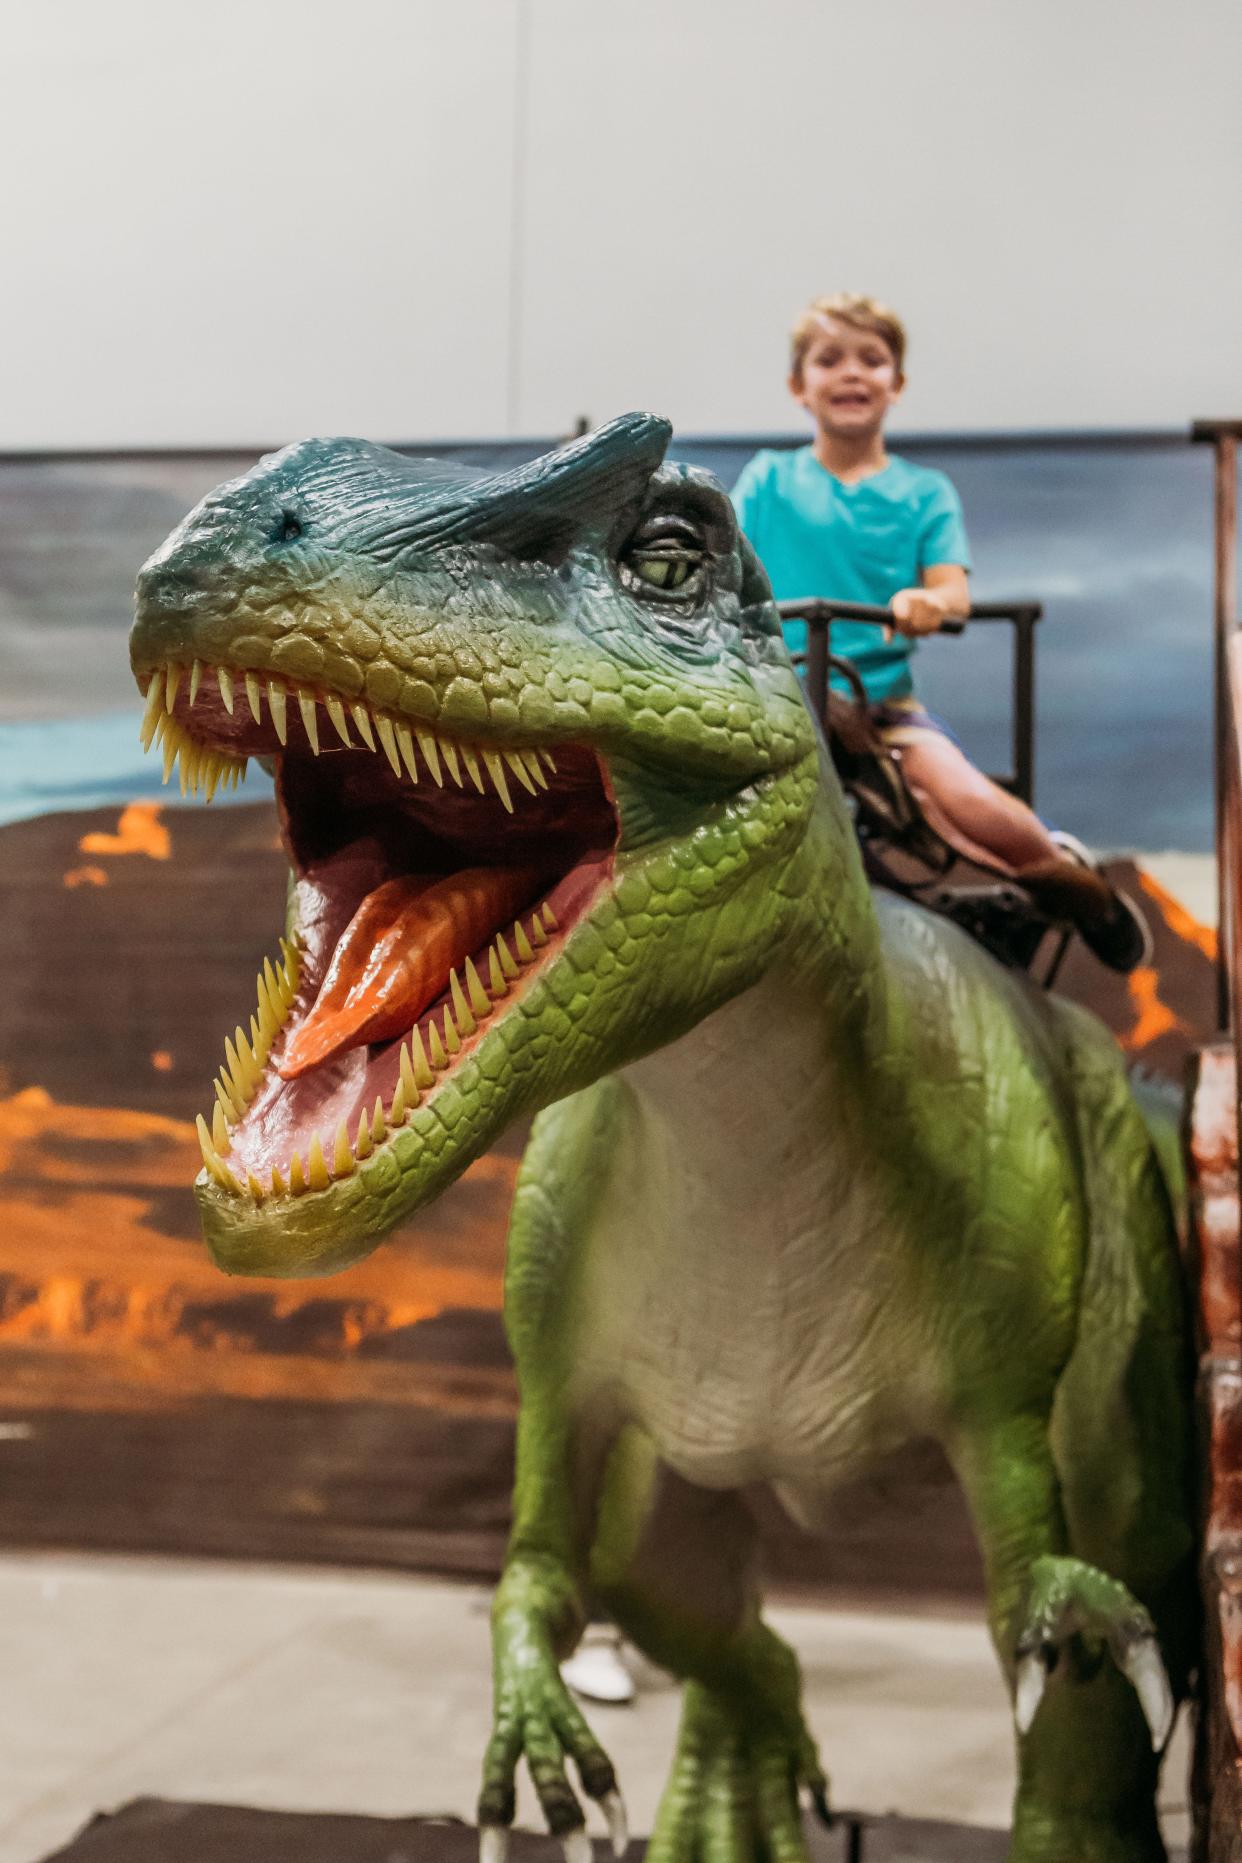 Kids can even ride some of the dinosaurs at Jurassic Quest.